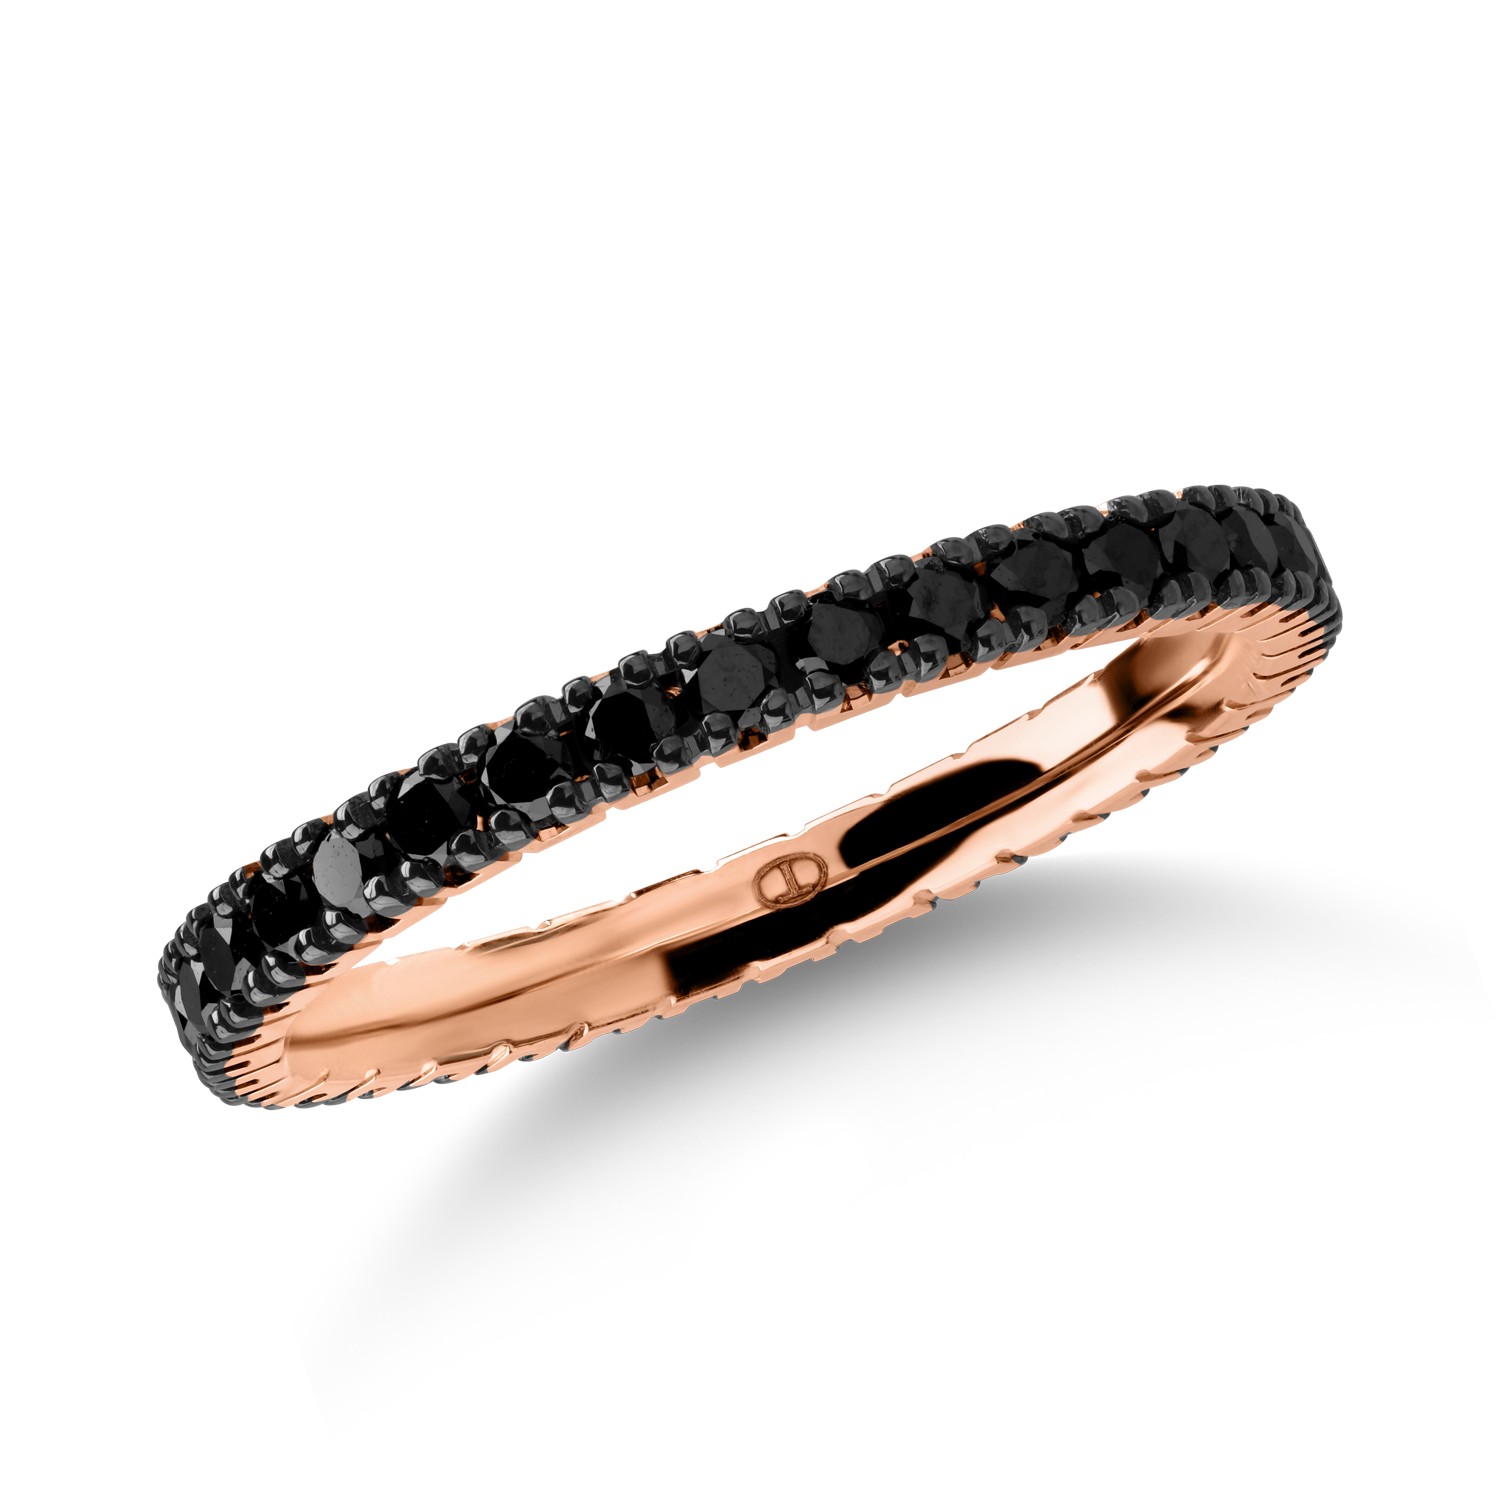 Eternity ring in rose gold with 0.55ct black diamonds